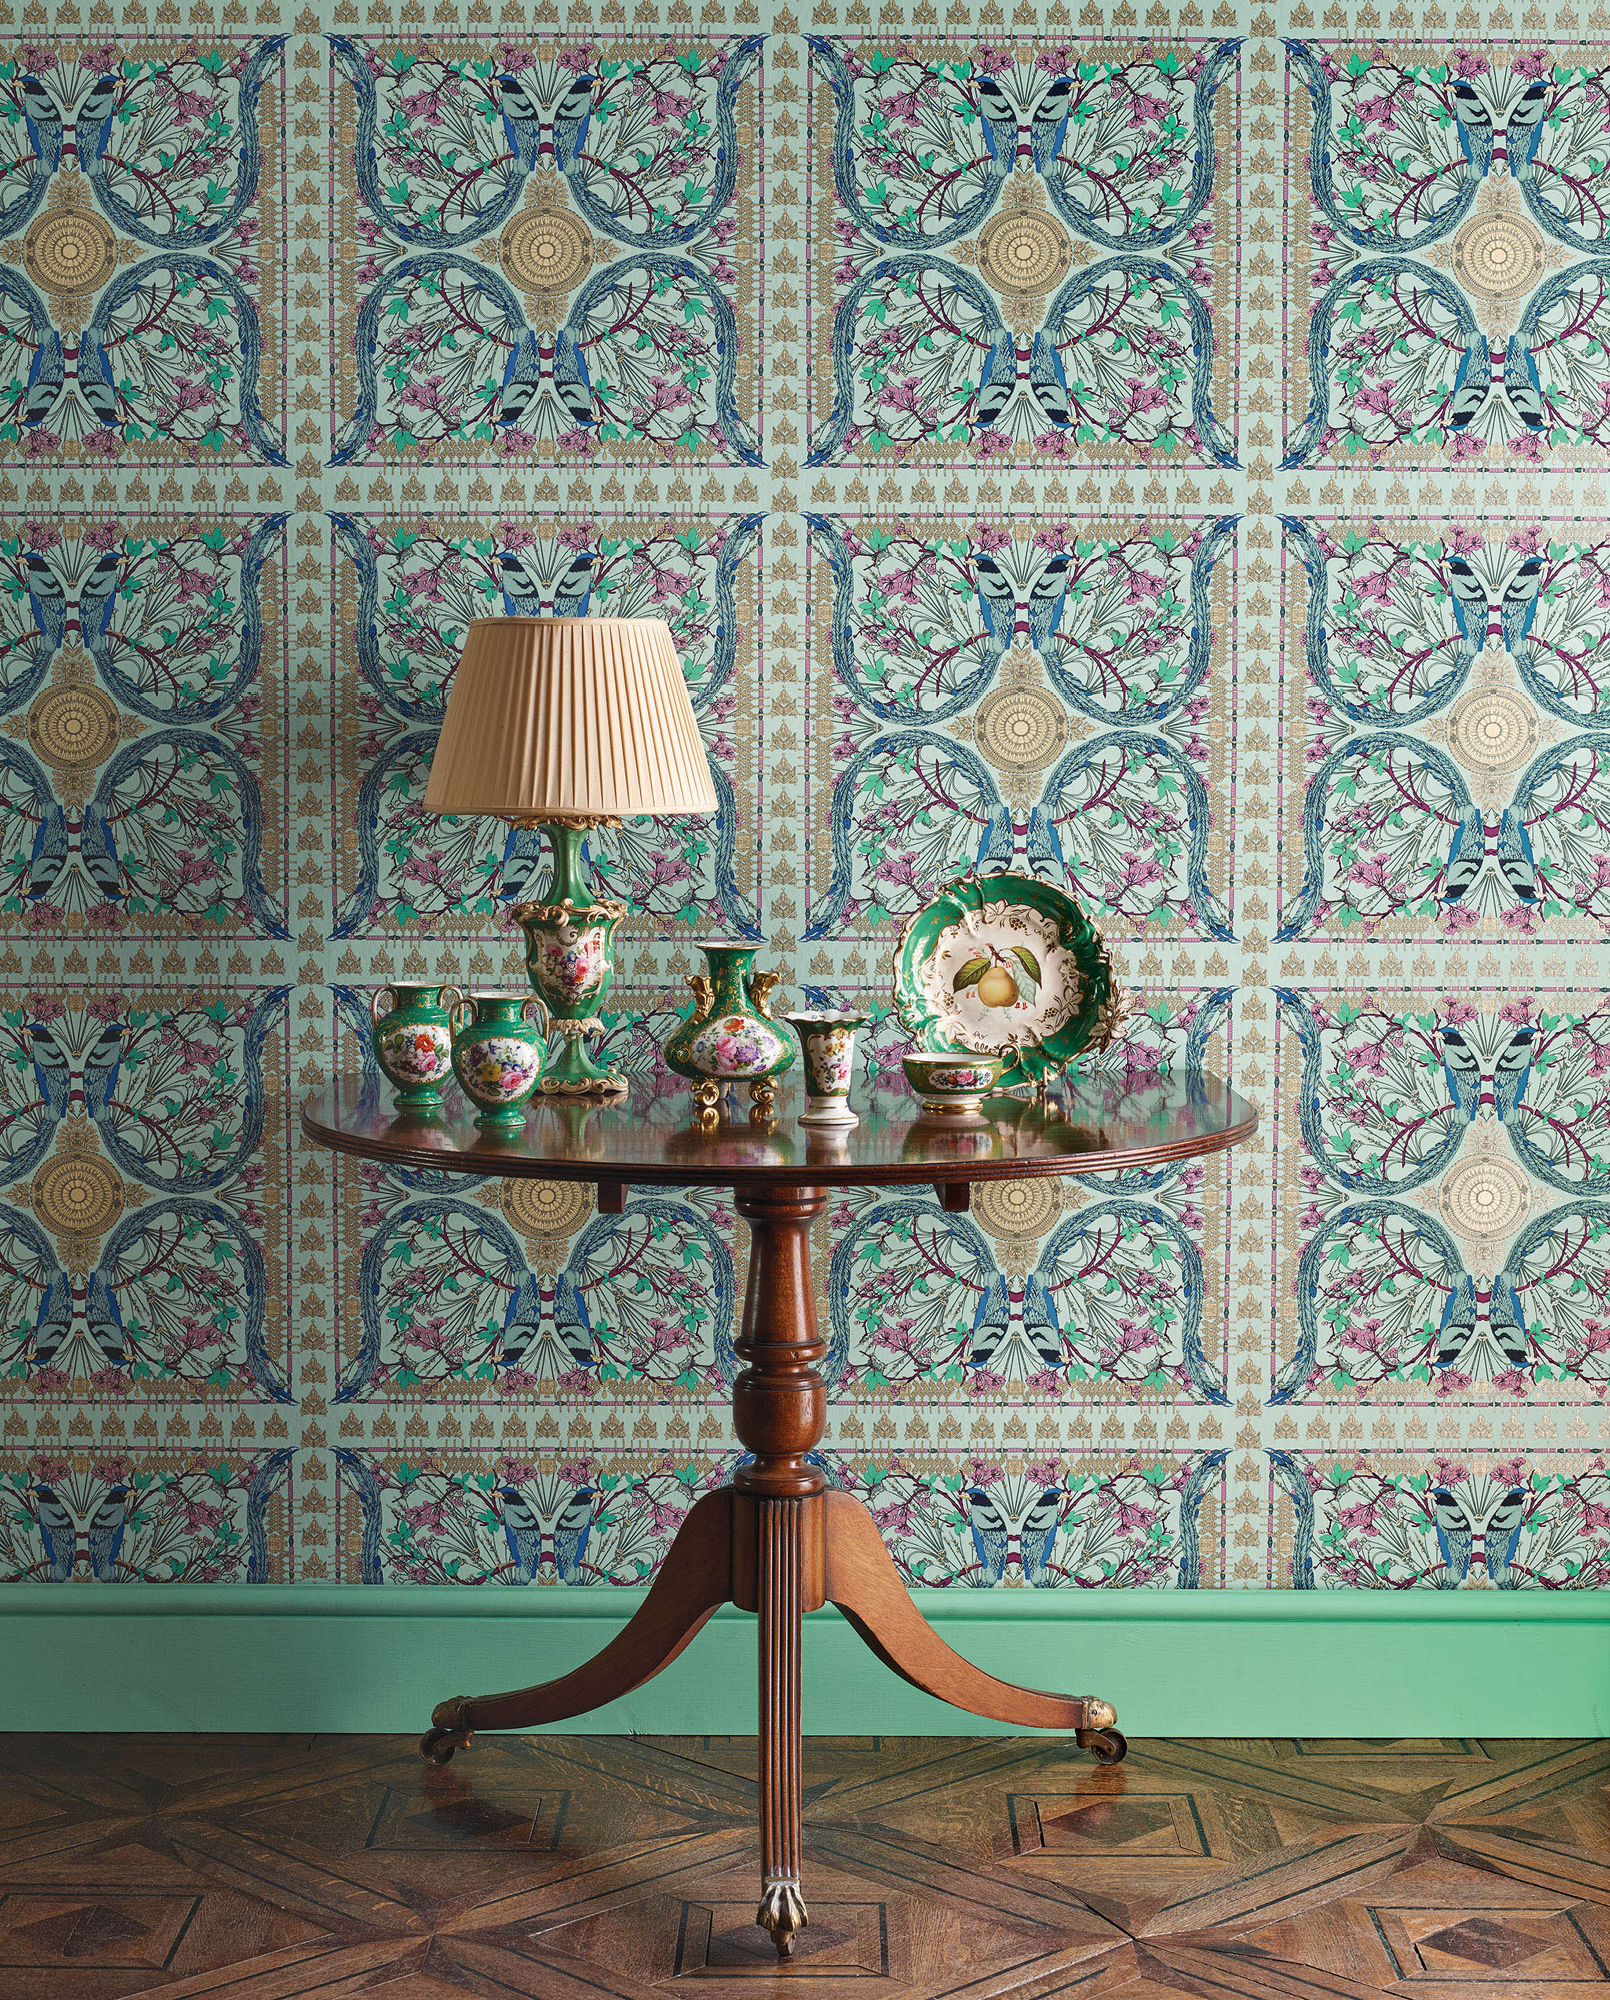 Matthew Williamson has collaborated with Osborne & Little on bold floral and nature inspired prints in the Belvoir wallpaper collection